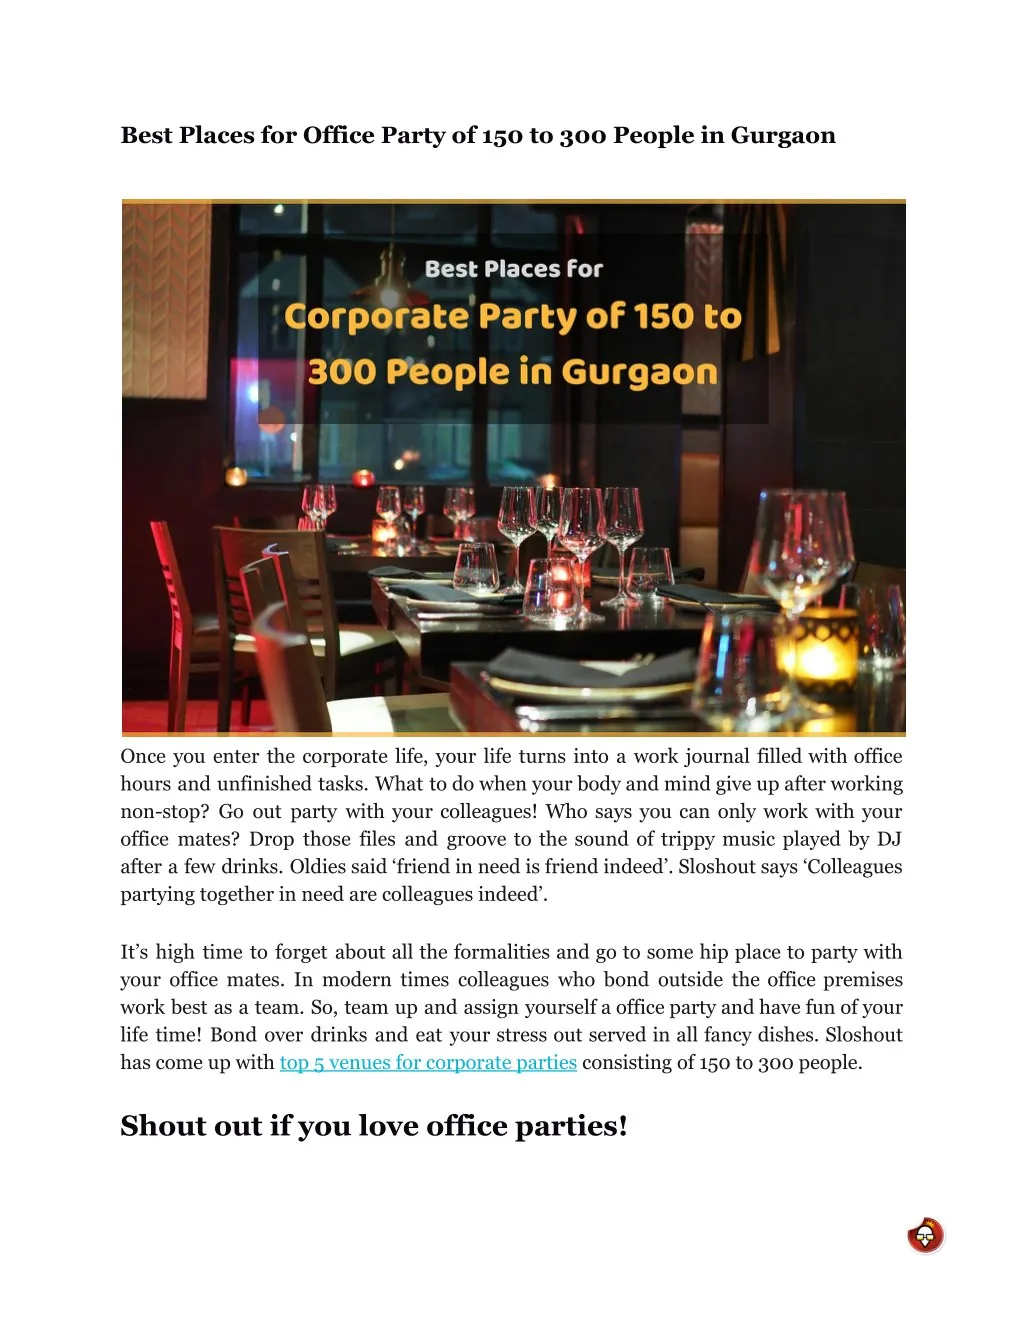 best places for office party of 150 to 300 people